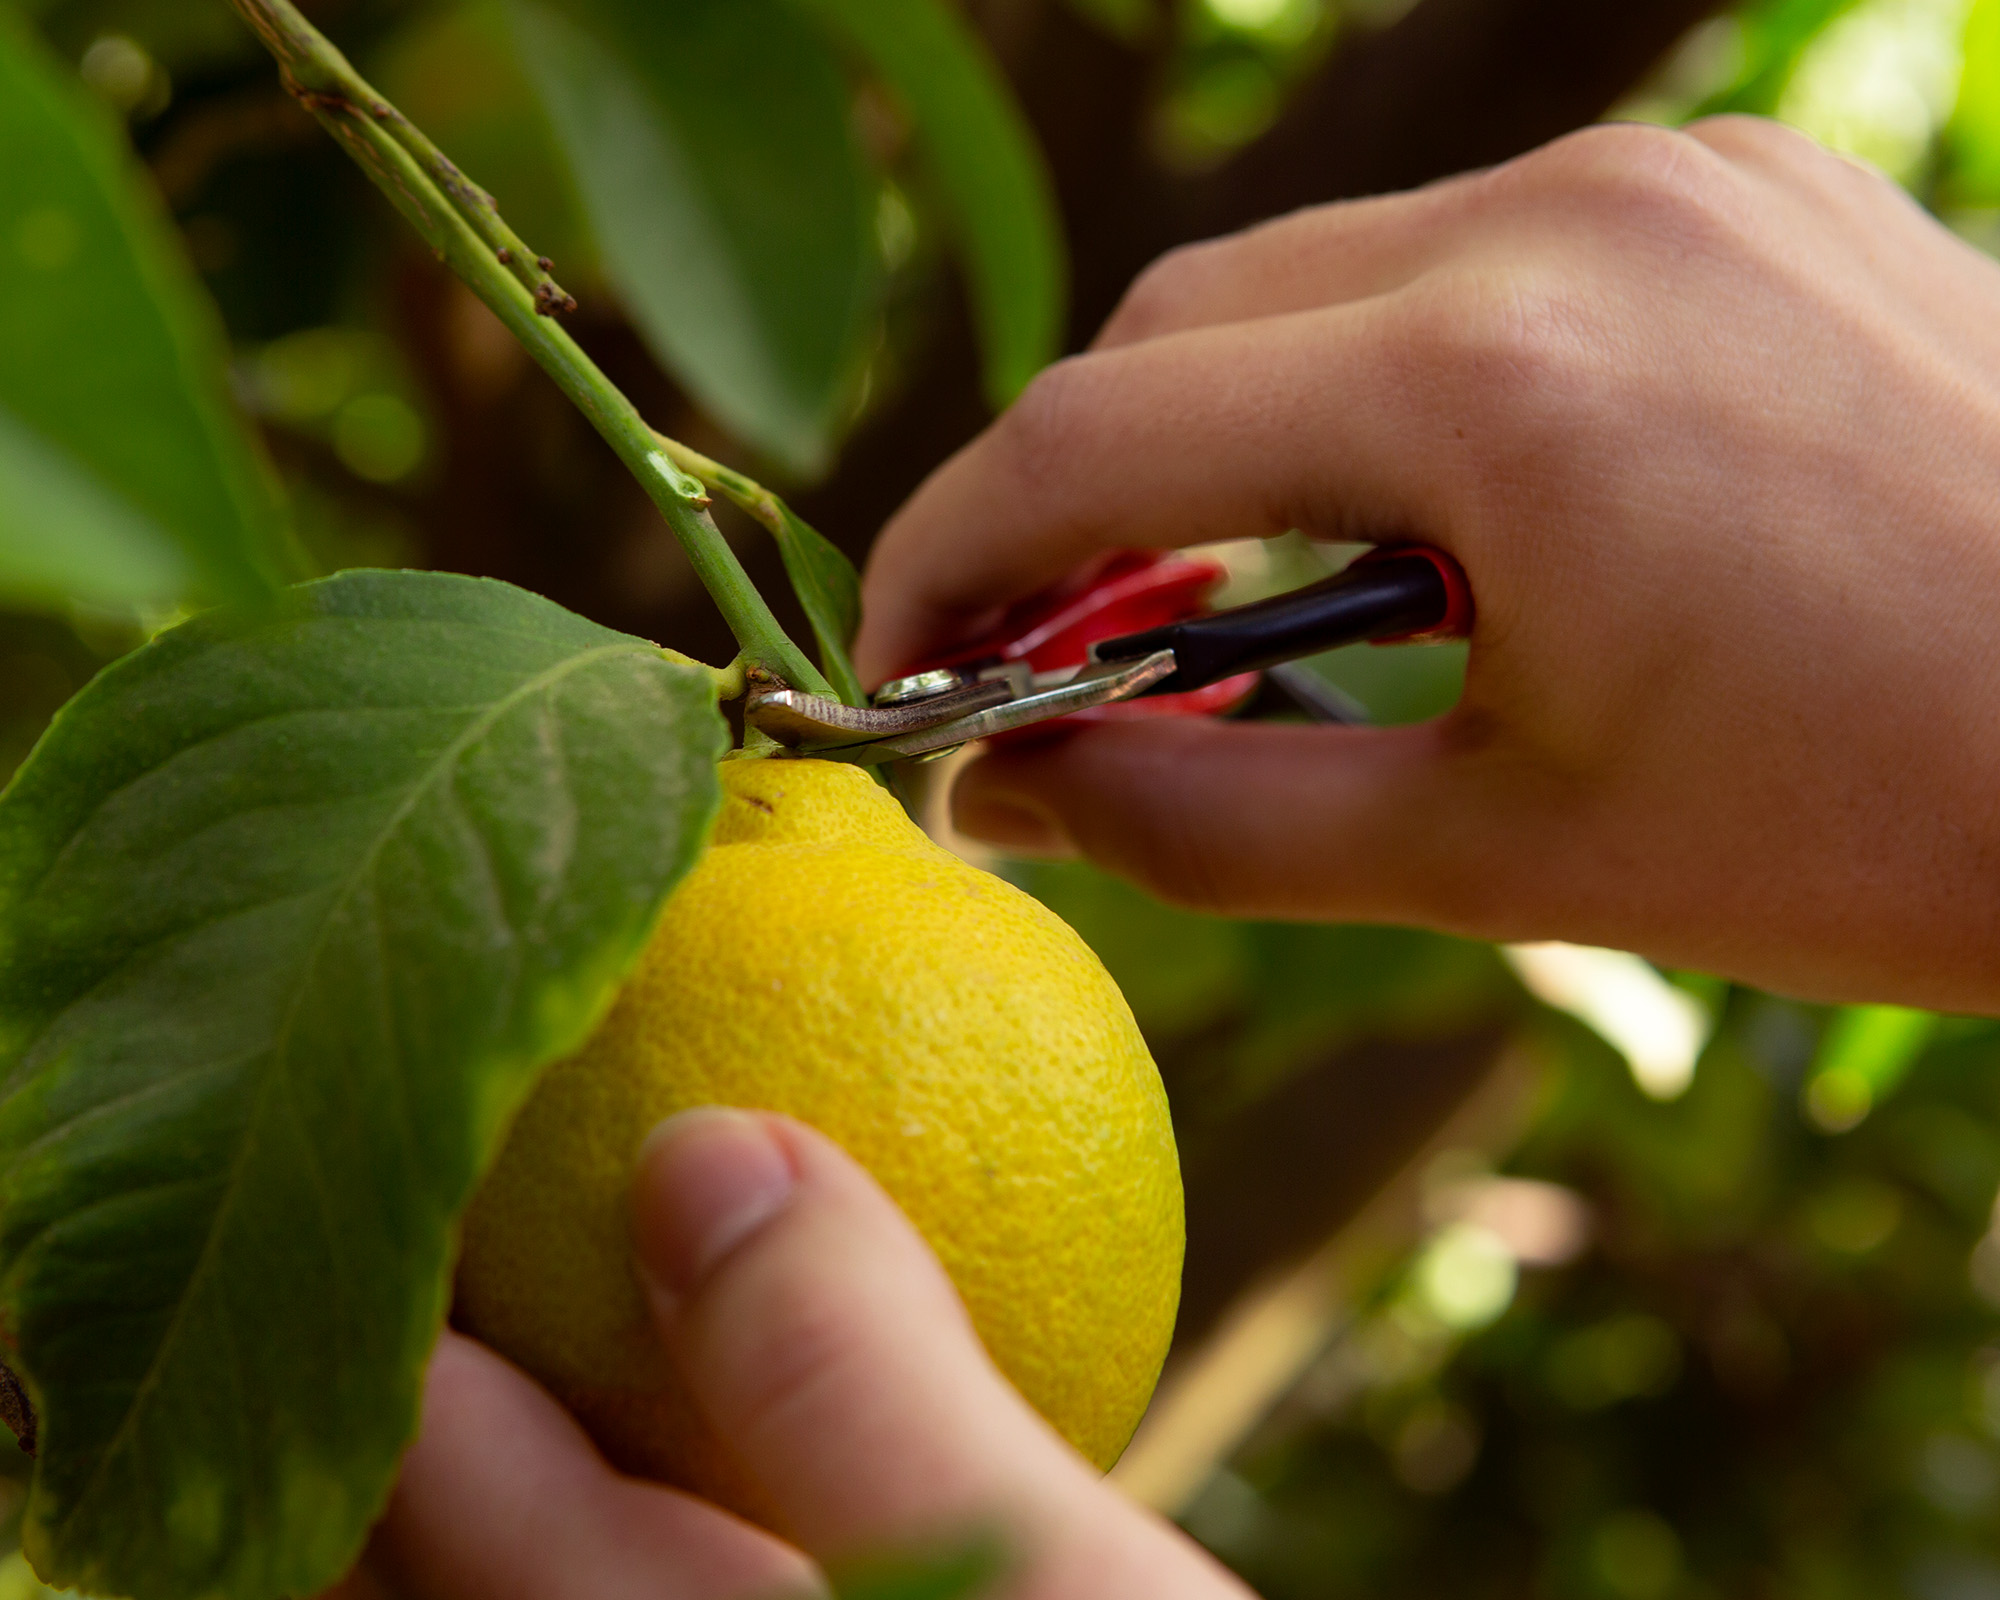 Felco 320 snips with curved blade - designed for fruit picking